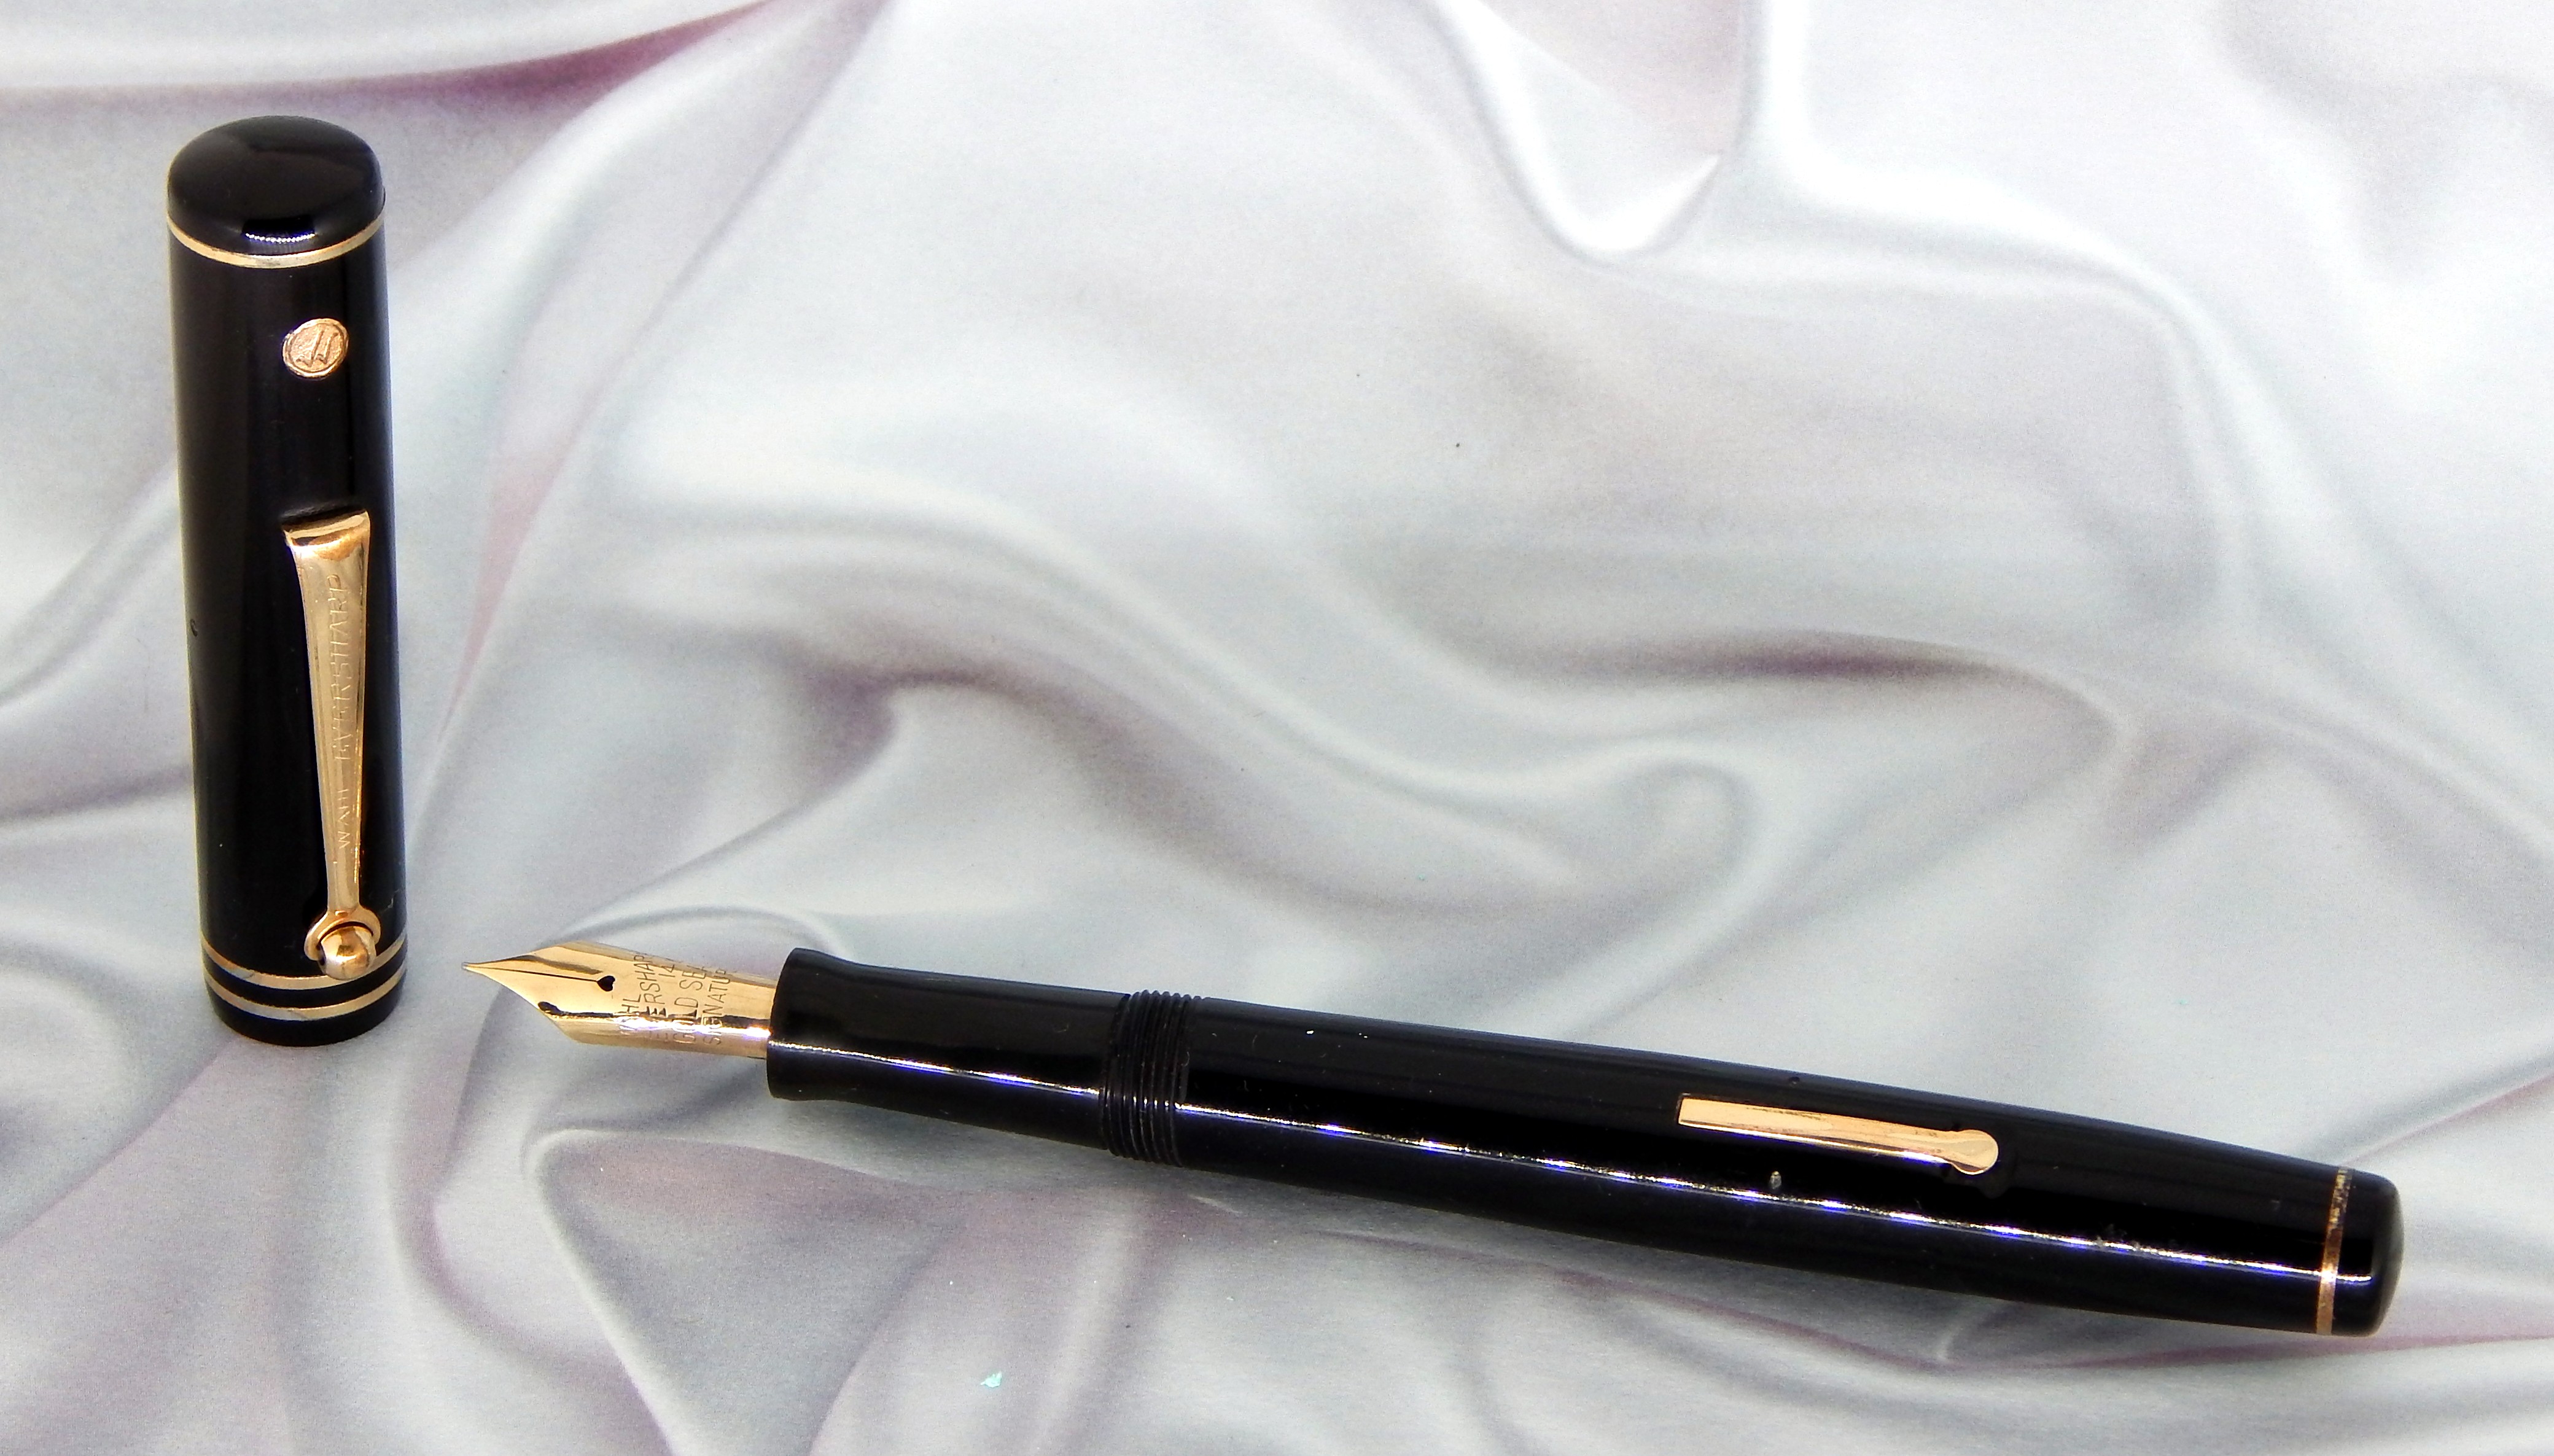 Pens and Pencils: : Wahl-Eversharp: GOLD SEAL